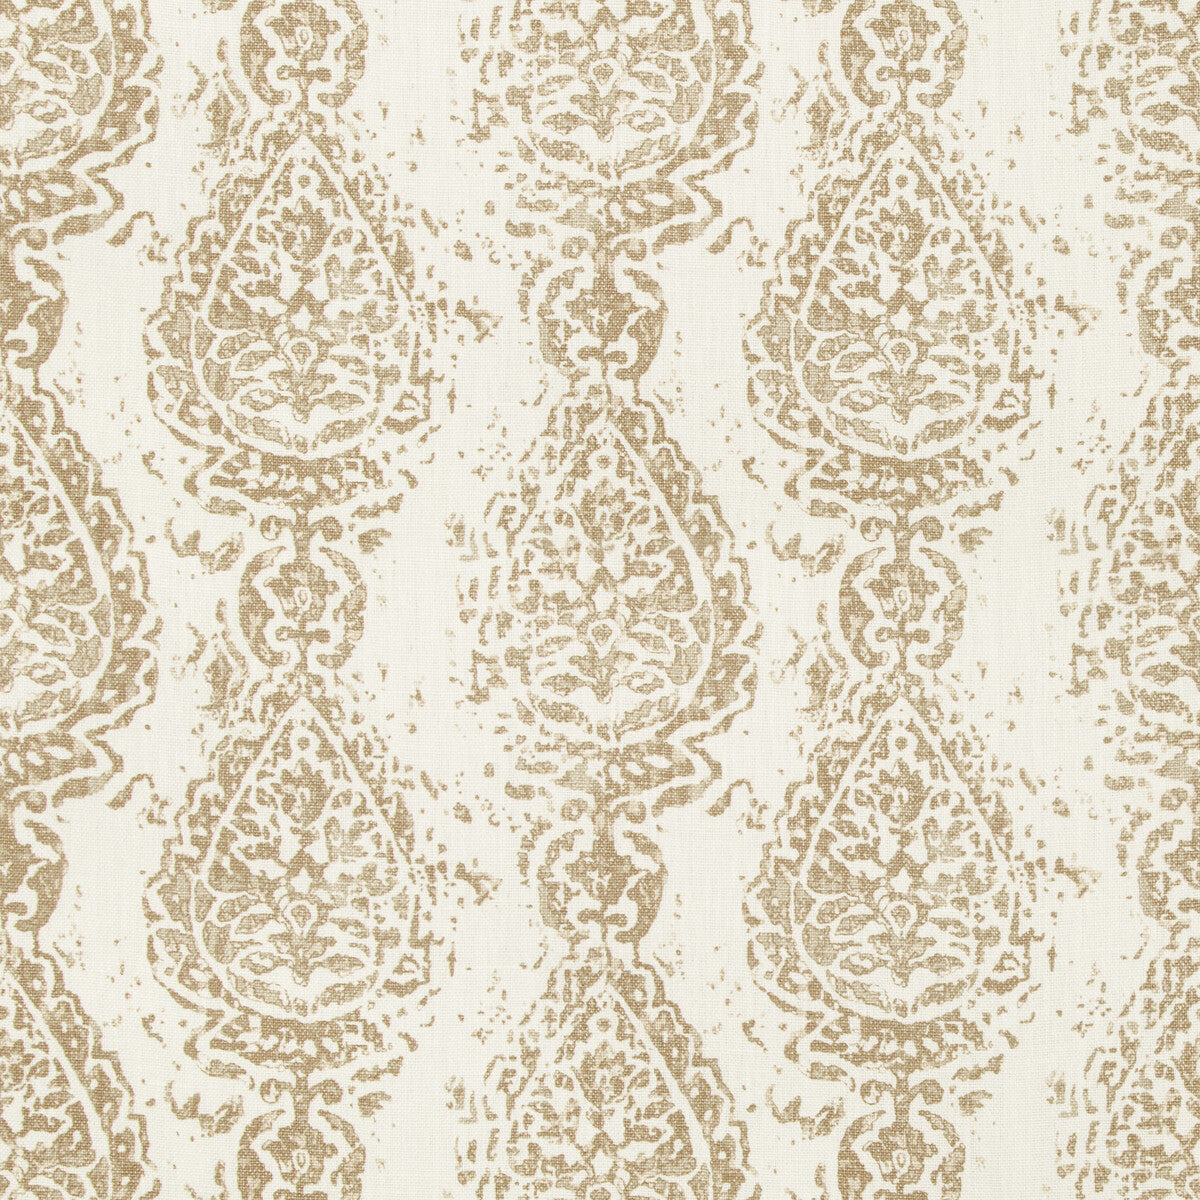 Abbess Paisley fabric in coconut color - pattern ABBESS.16.0 - by Kravet Design in the Barclay Butera Sagamore collection